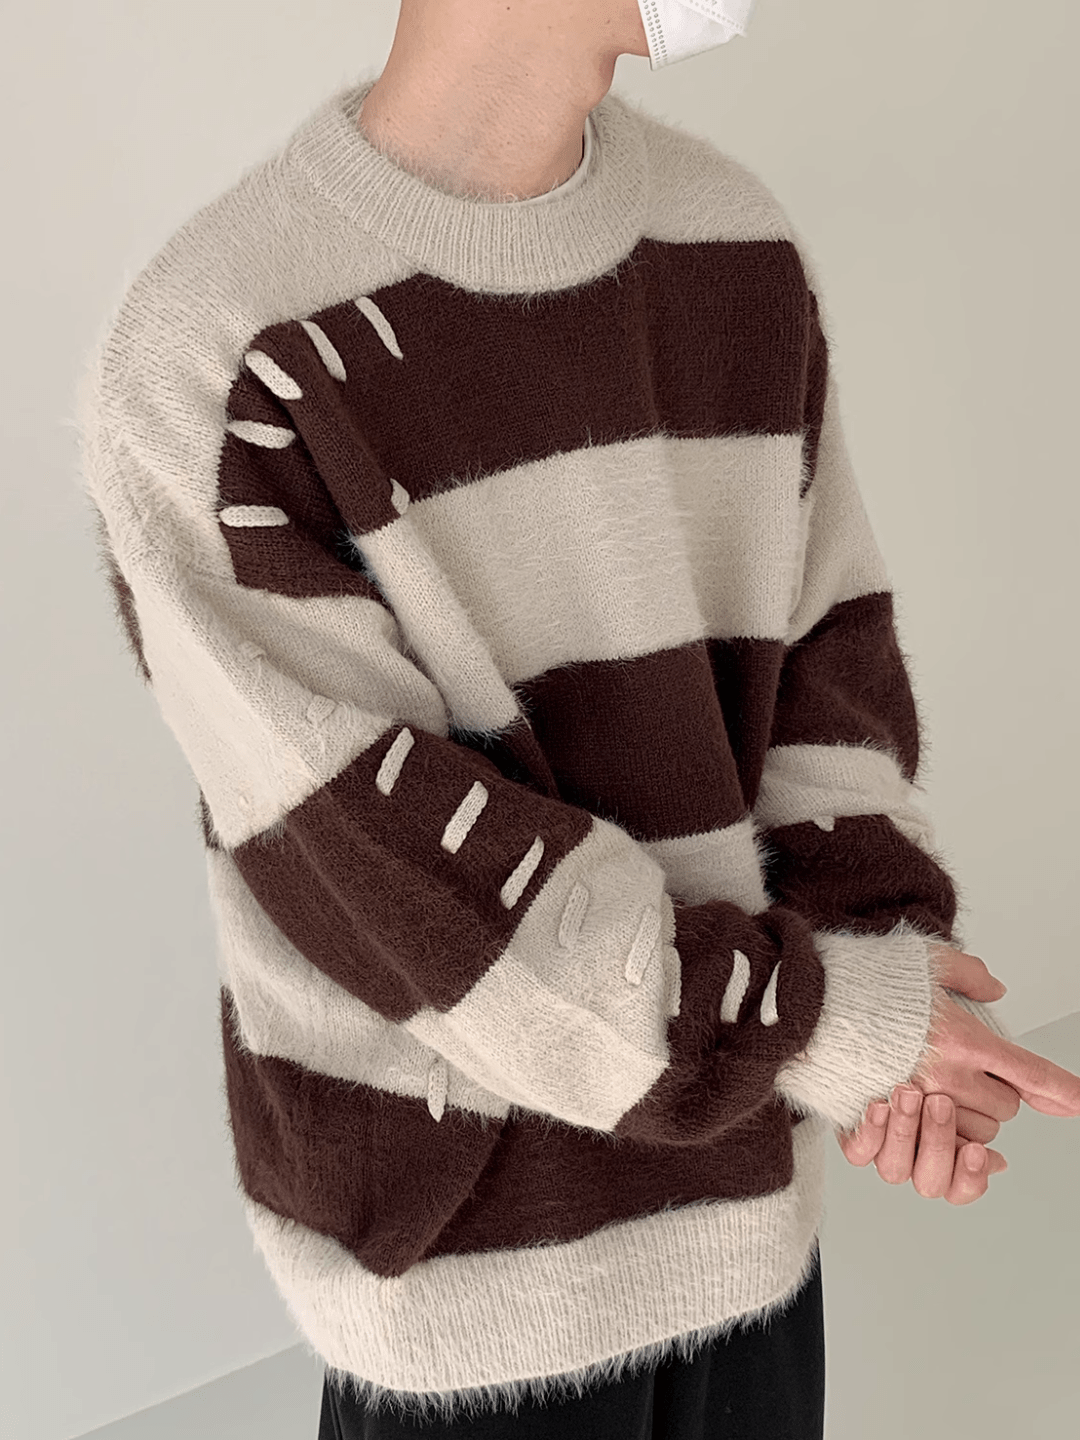 [DAZIONSED] Patch design mohair knit sweater na772